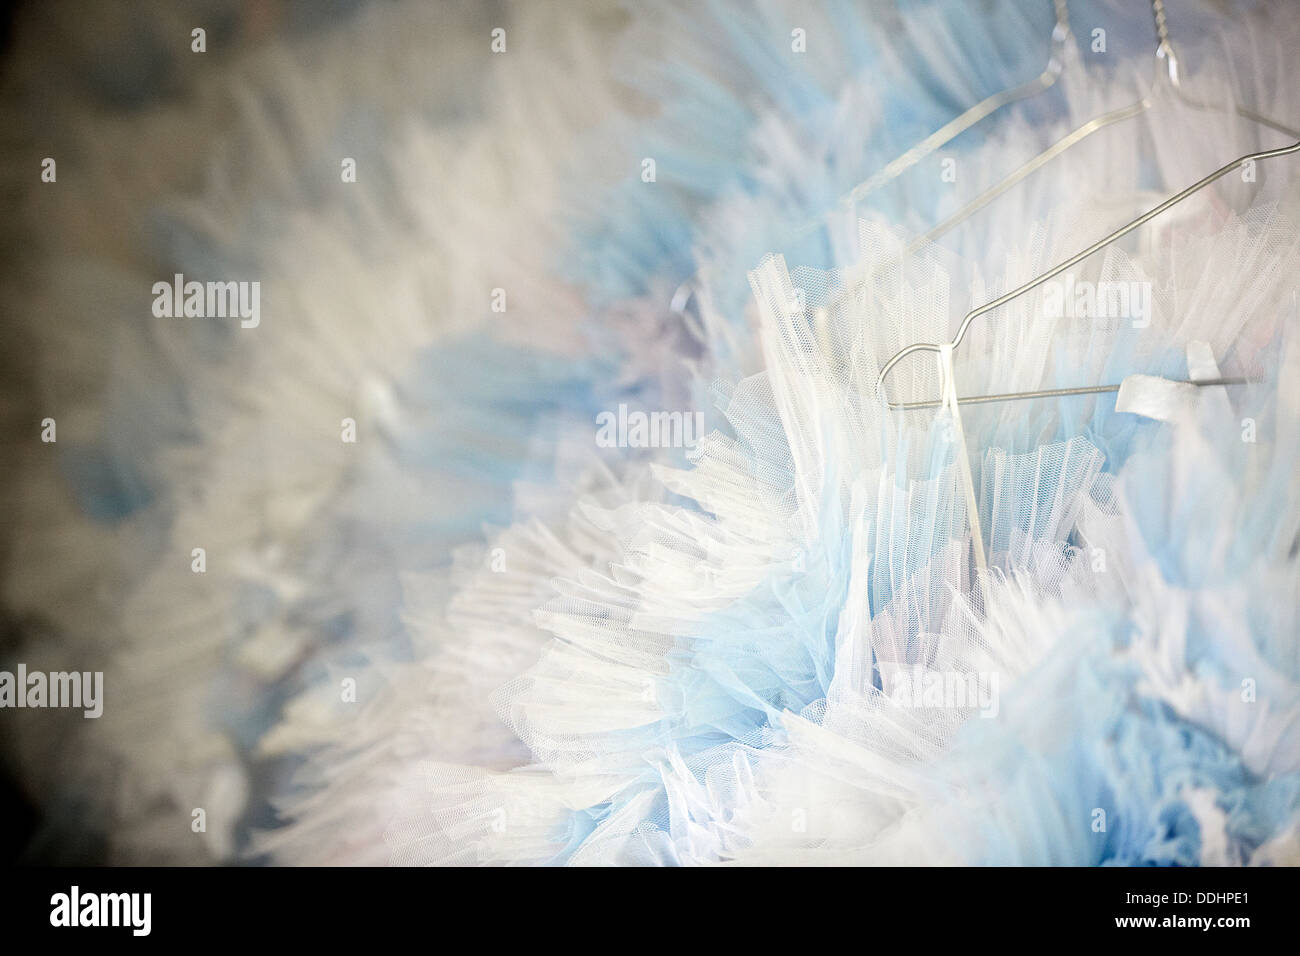 Close up details of tutus hanging up on wire coat hangers Stock Photo